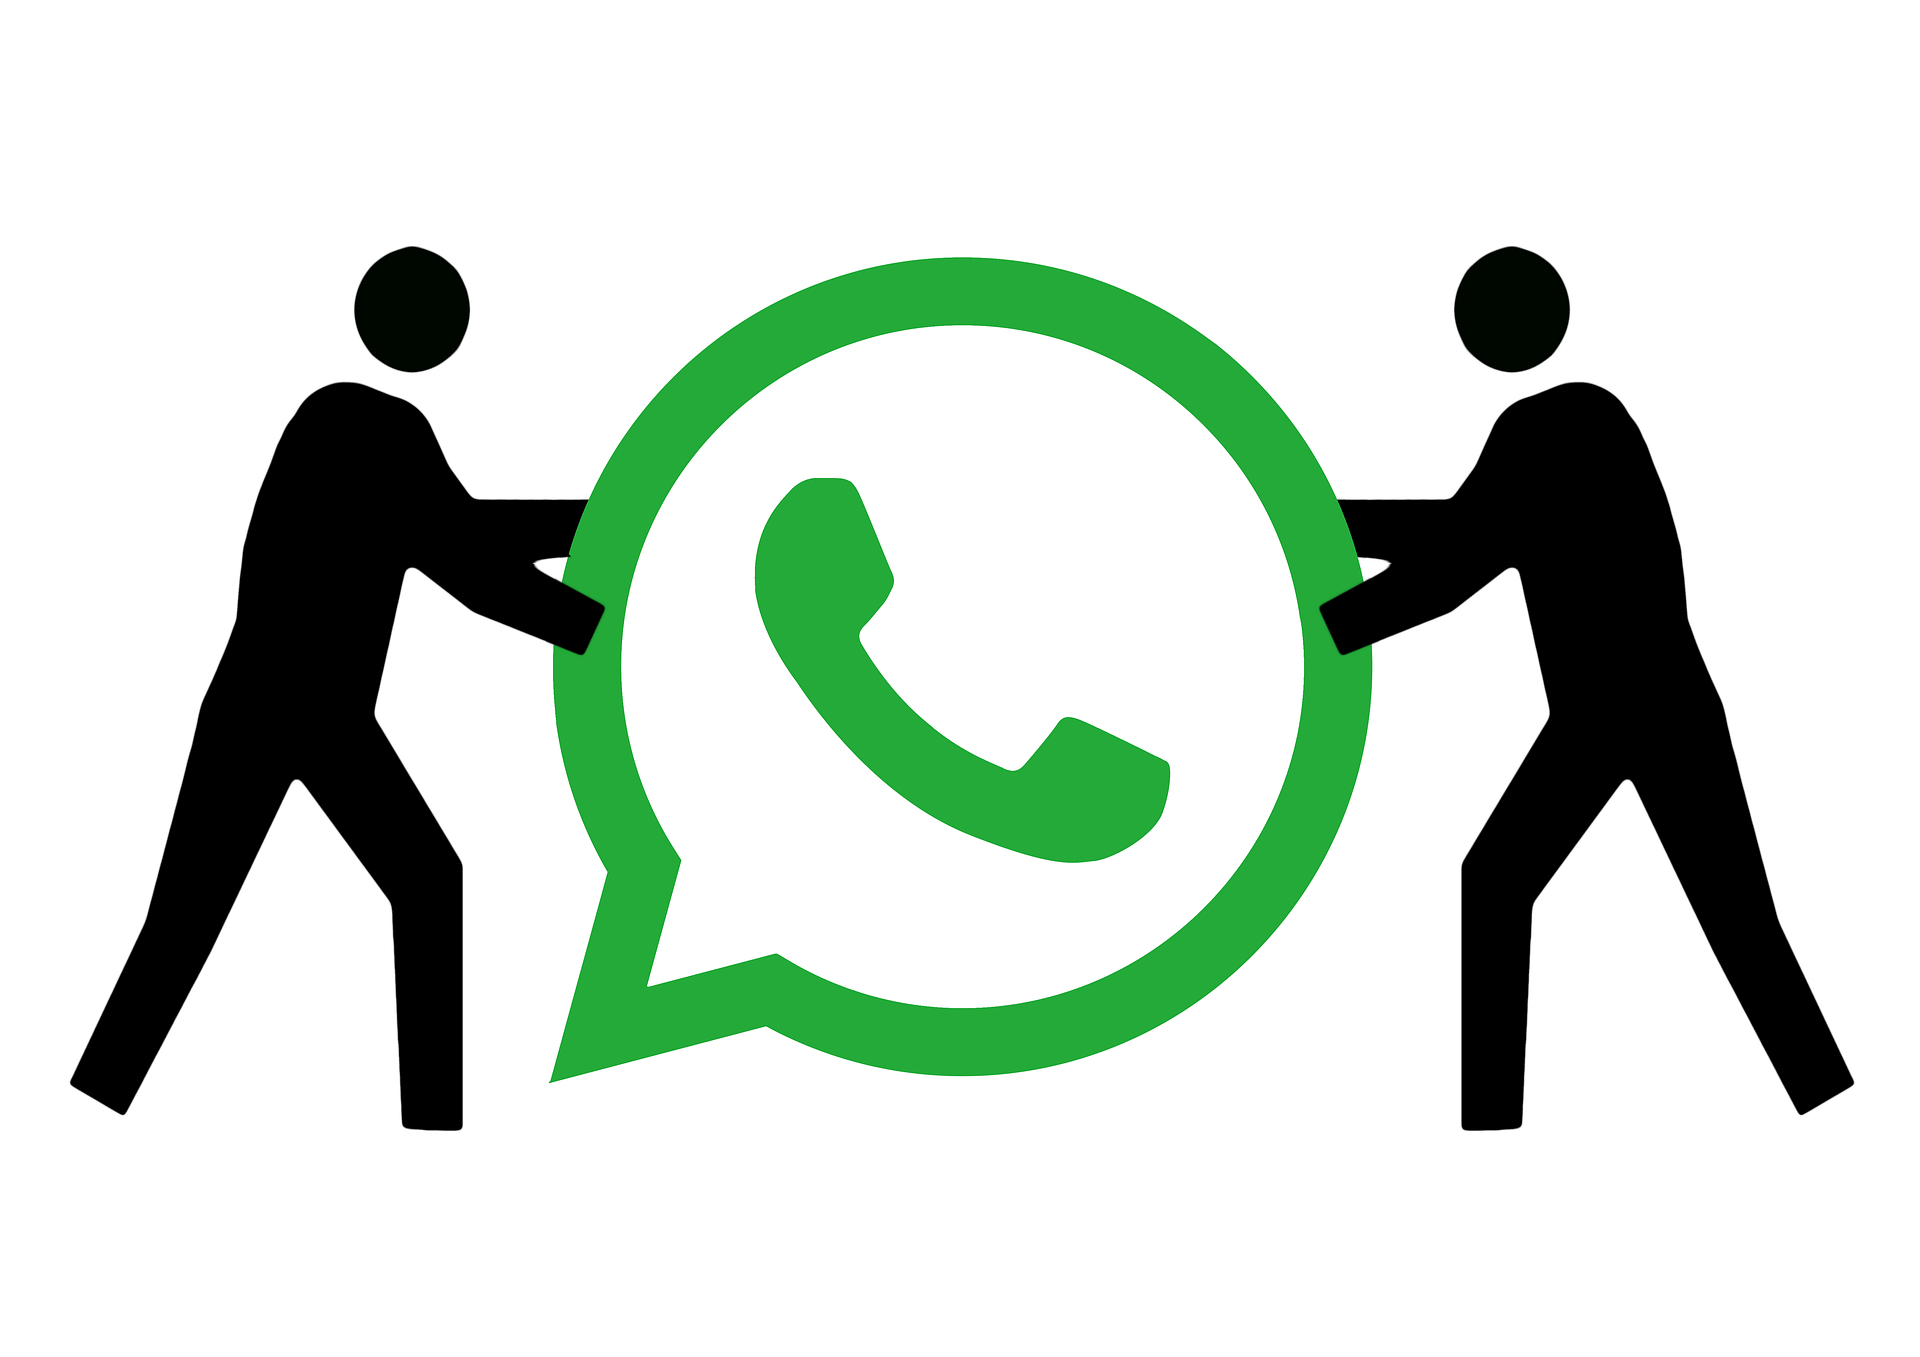 How to Send a Message on WhatsApp without Saving Contact Number